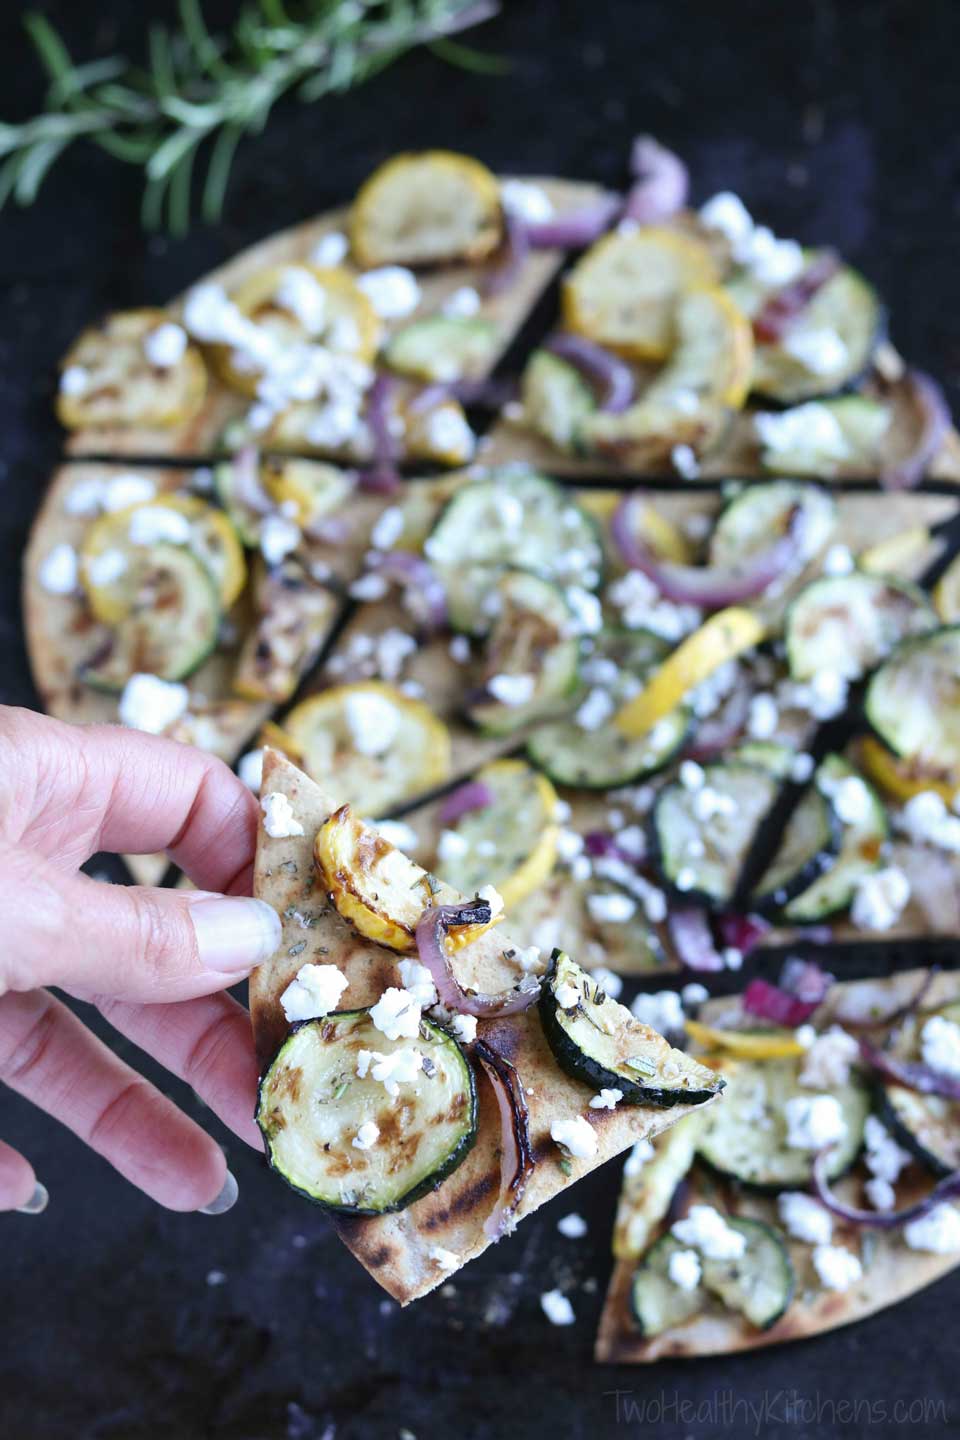 Easy and incredibly flavorful, with just a few simple ingredients! This Grilled Zucchini Flatbread recipe is perfect served as an impressive, hearty appetizer, or combined with a salad for lunch or an easy dinner! If you need zucchini recipes to use up extra zucchini, this quick grilled flatbread recipe is ideal! With creamy goat cheese and grilled vegetables, it’s like a grilled pizza with the crispy cracker-thin crust of a flatbread! A great 30-minute meal! {ad} | www.TwoHealthyKitchens.com